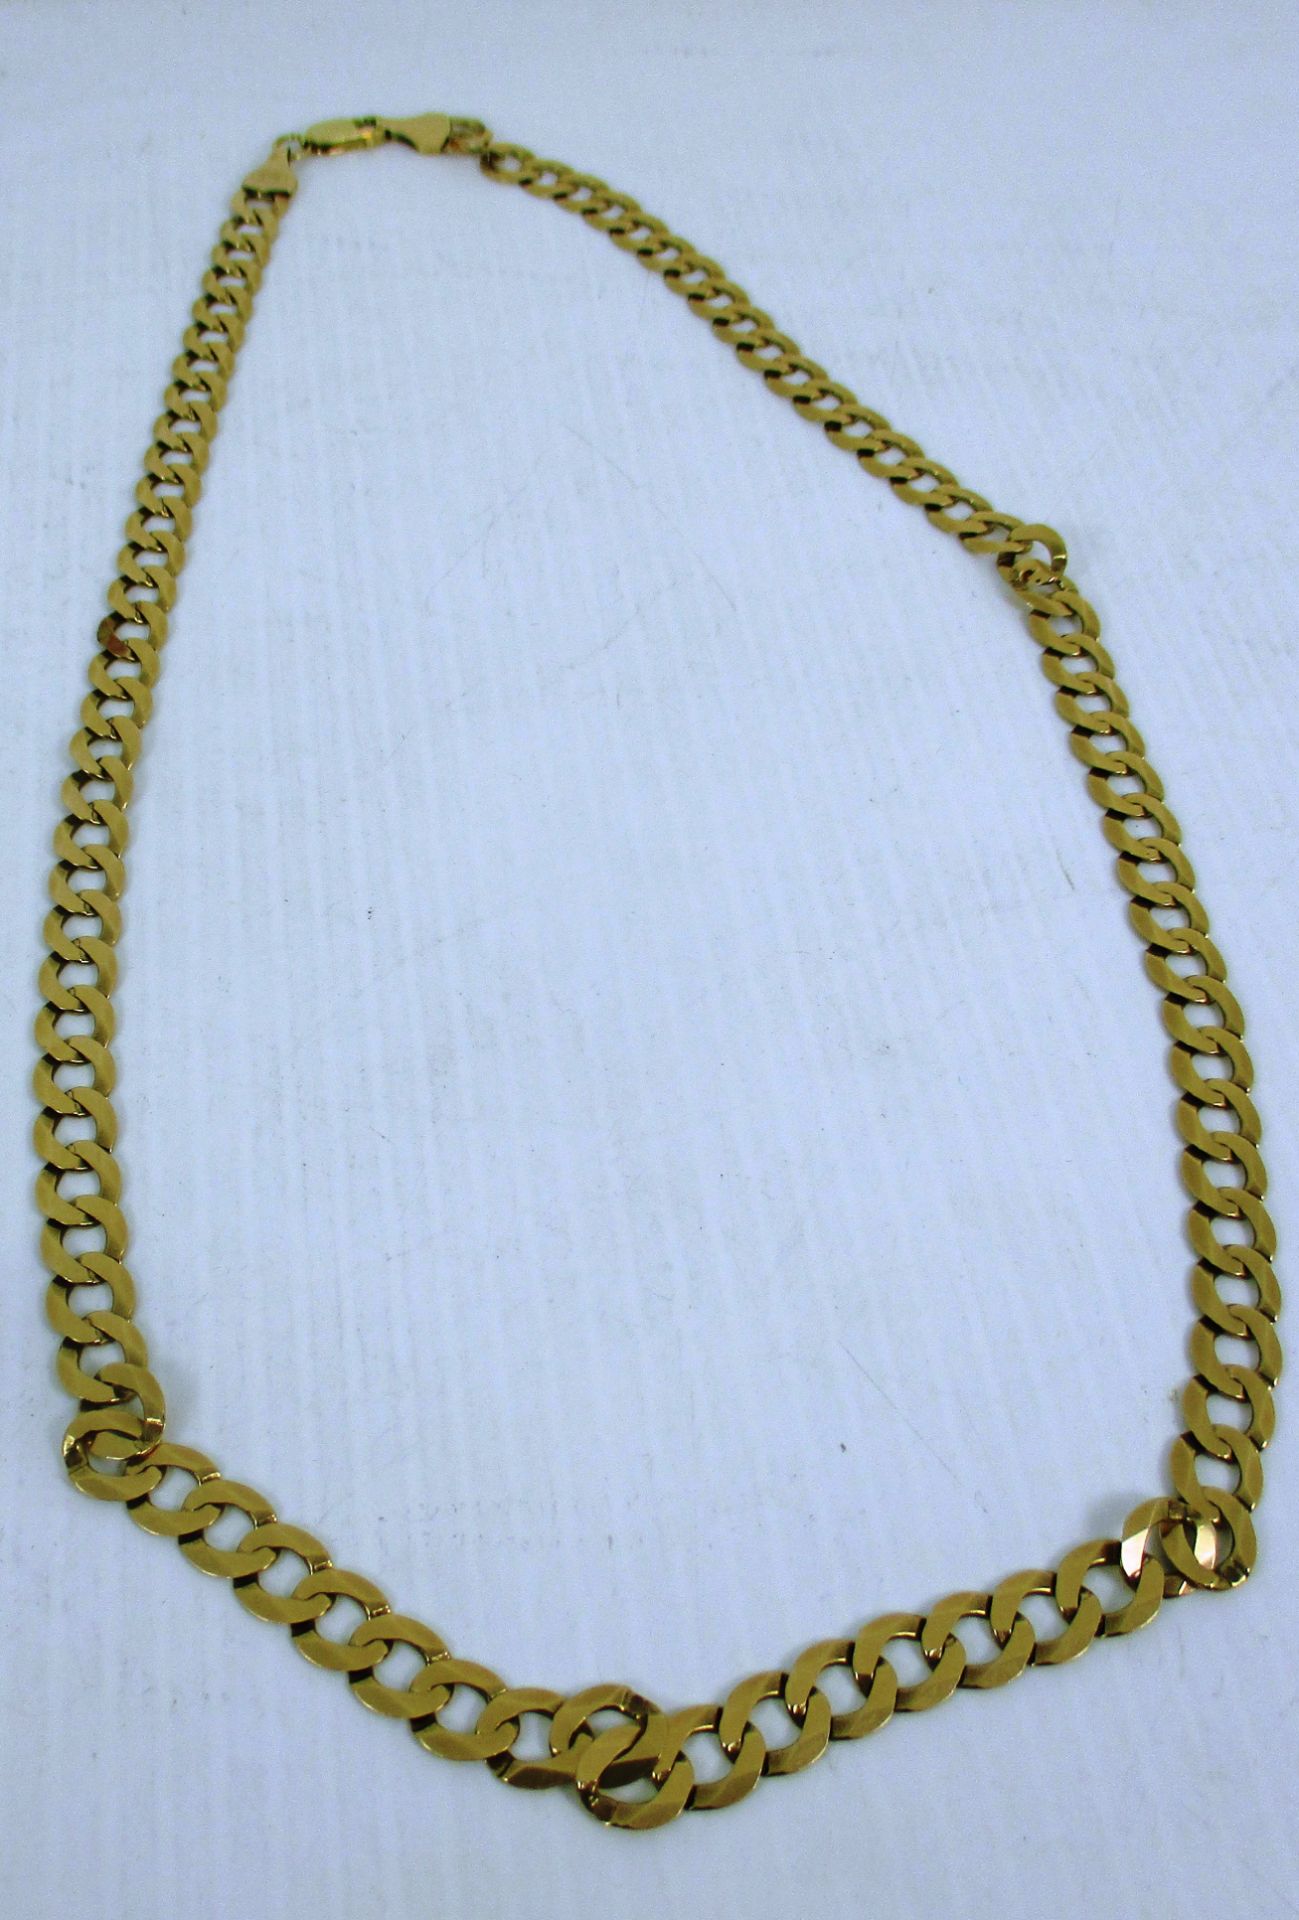 A 9ct gold flat link chain, 60cm long (total approx weight 25.